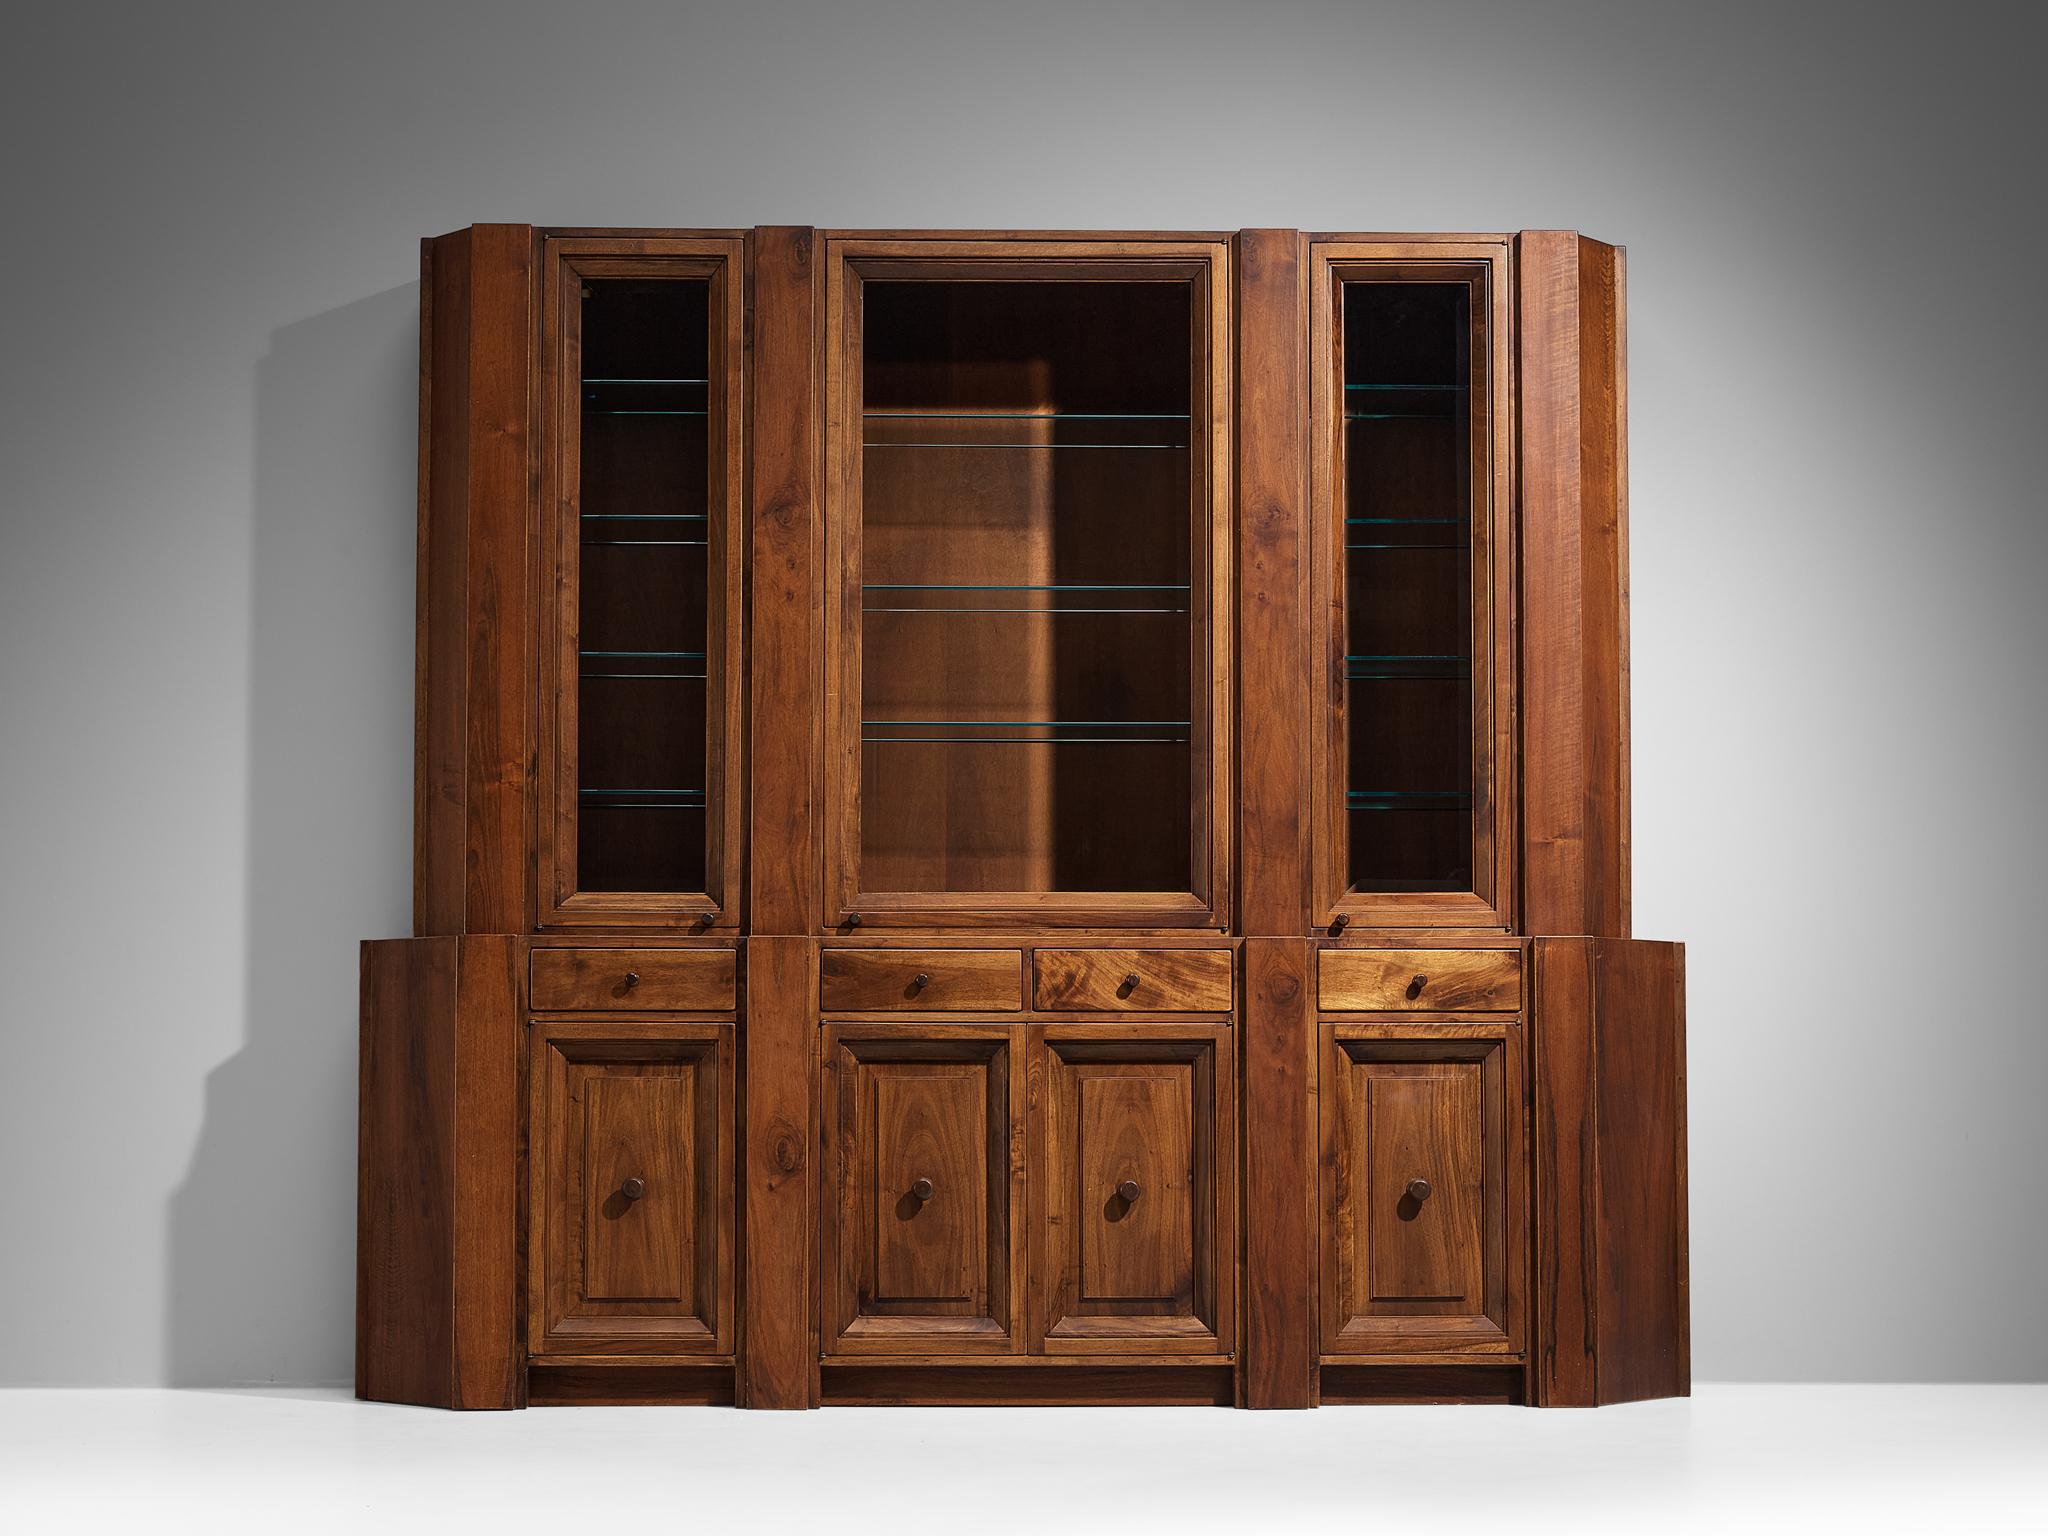 Giuseppe Rivadossi, library, walnut, Italy, 1970s

This impressive library is designed by Italian Giuseppe Rivadossi in the 1970s. The lower part of this piece is composed of large panels of walnut wood and small and elegant handles on the doors.